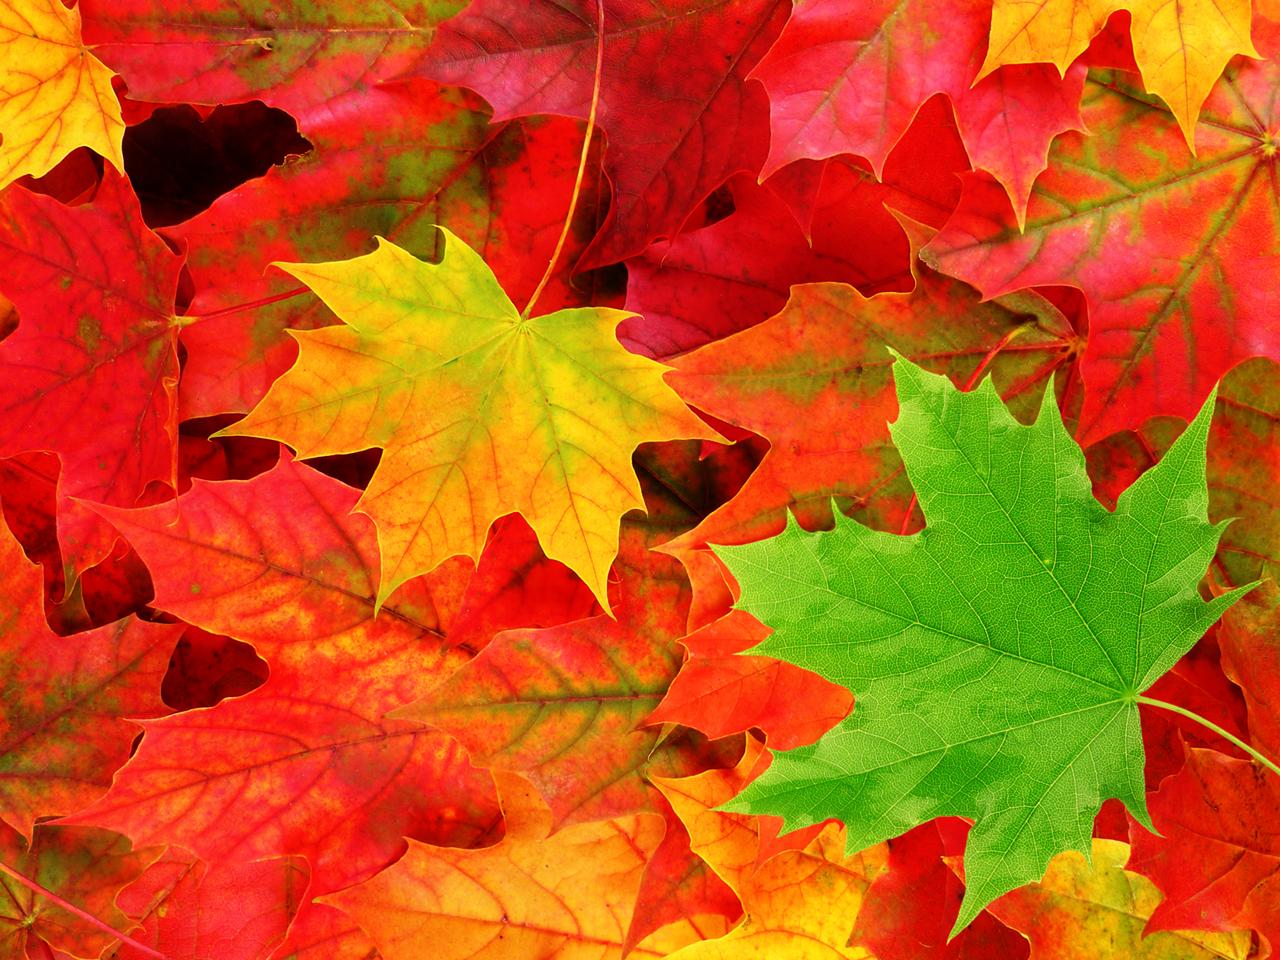 Leaf Autumn Wallpapers